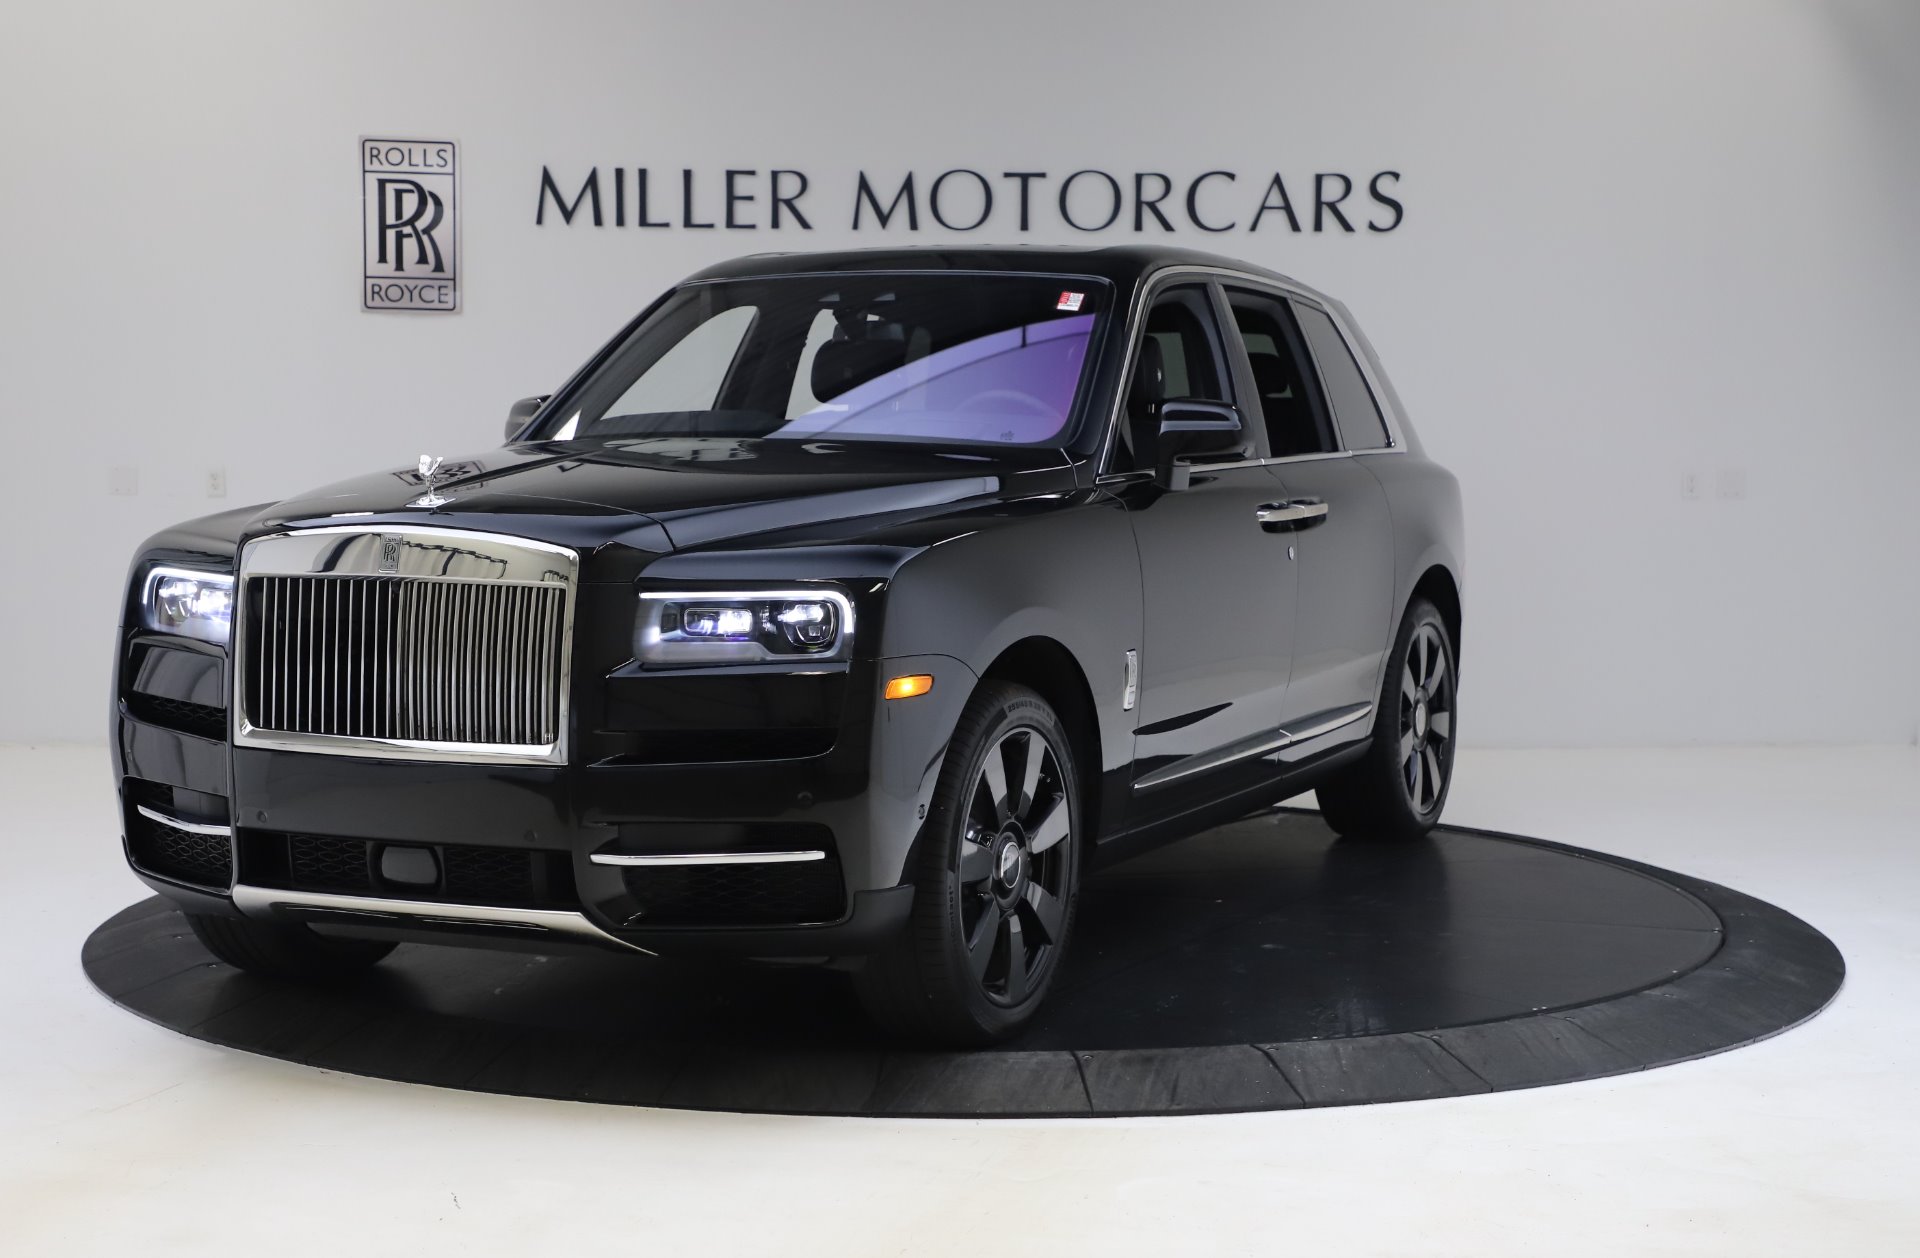 New 2020 Rolls-Royce Cullinan for sale Sold at Alfa Romeo of Greenwich in Greenwich CT 06830 1